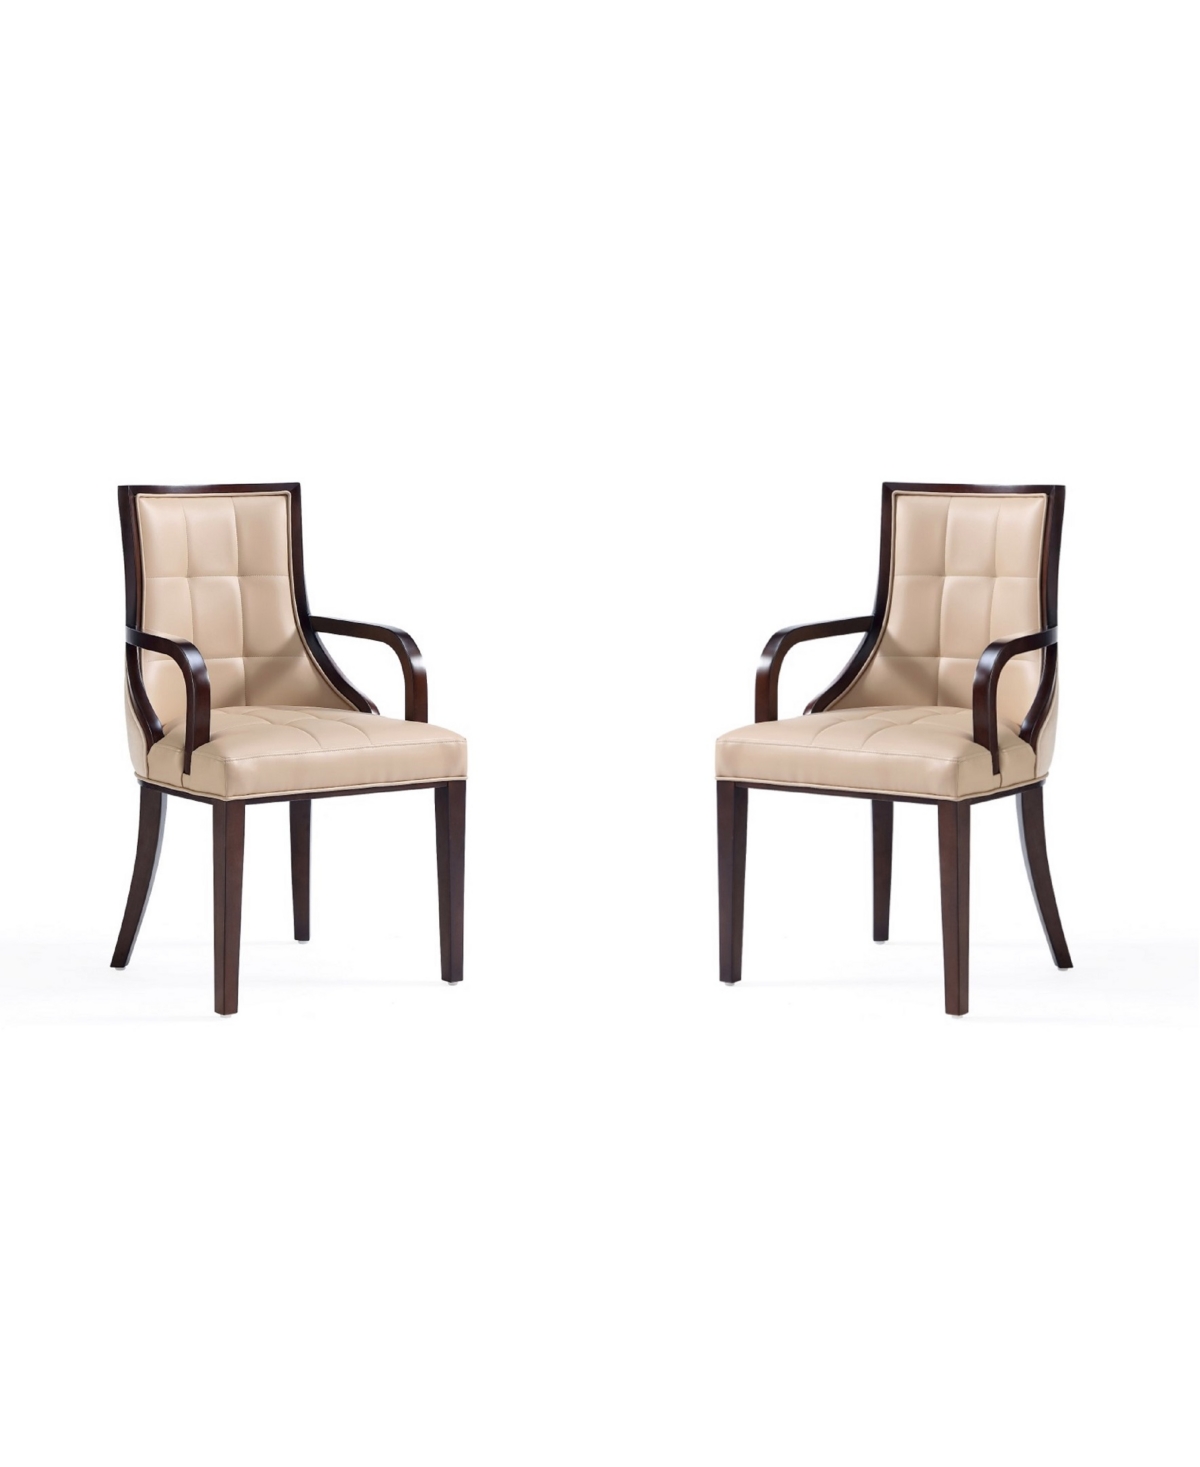 Manhattan Comfort Fifth Avenue 2-piece Beech Wood Faux Leather Upholstered Dining Armchair In Tan